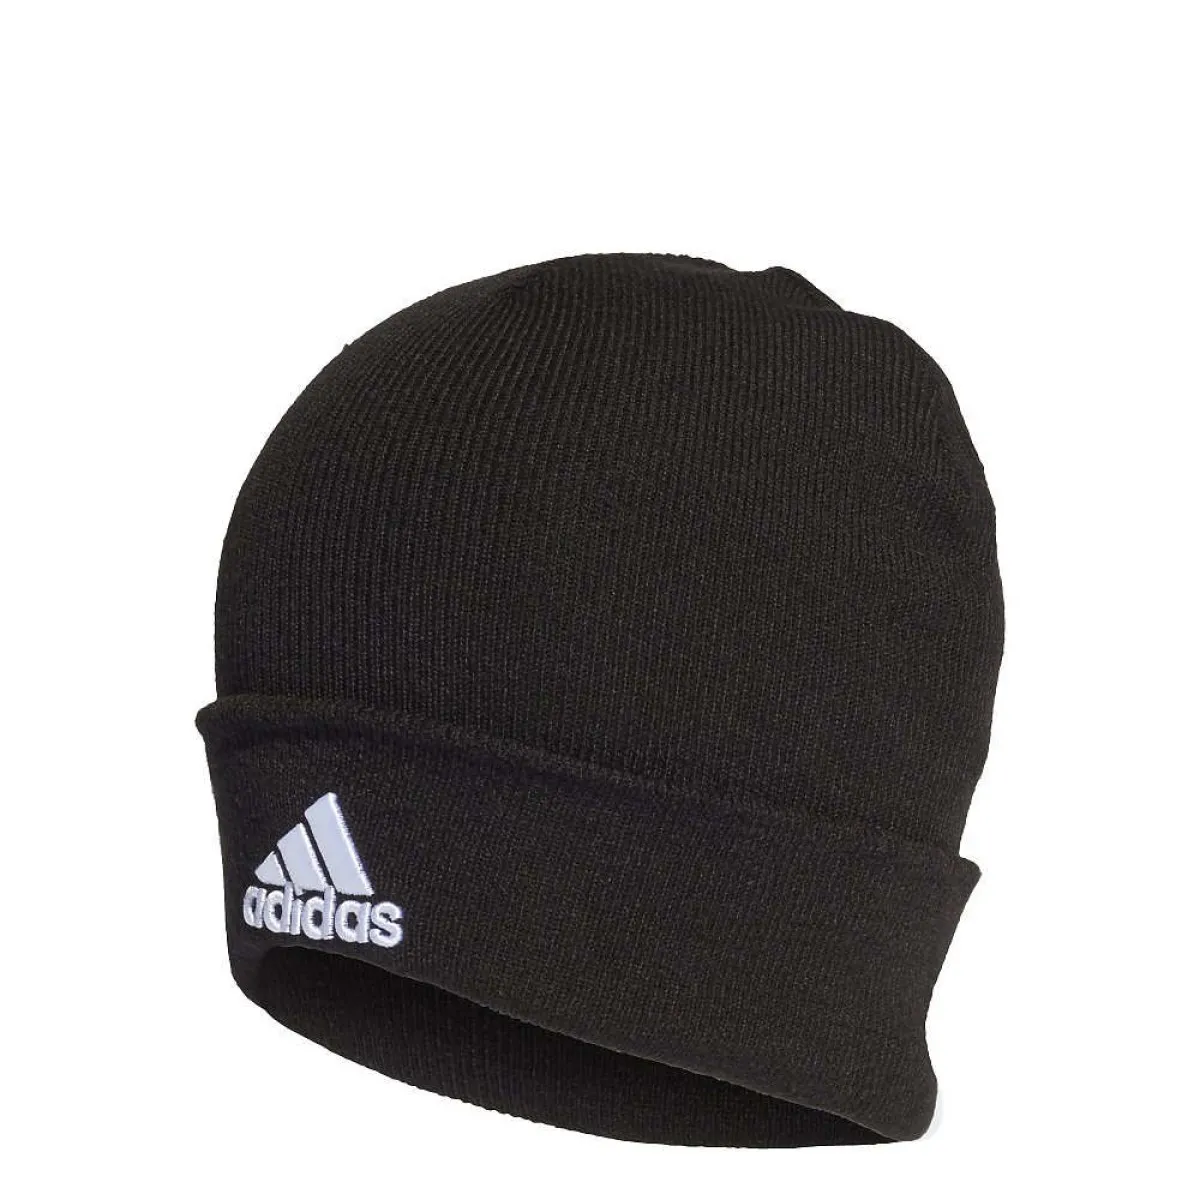 adidas knitted hat black